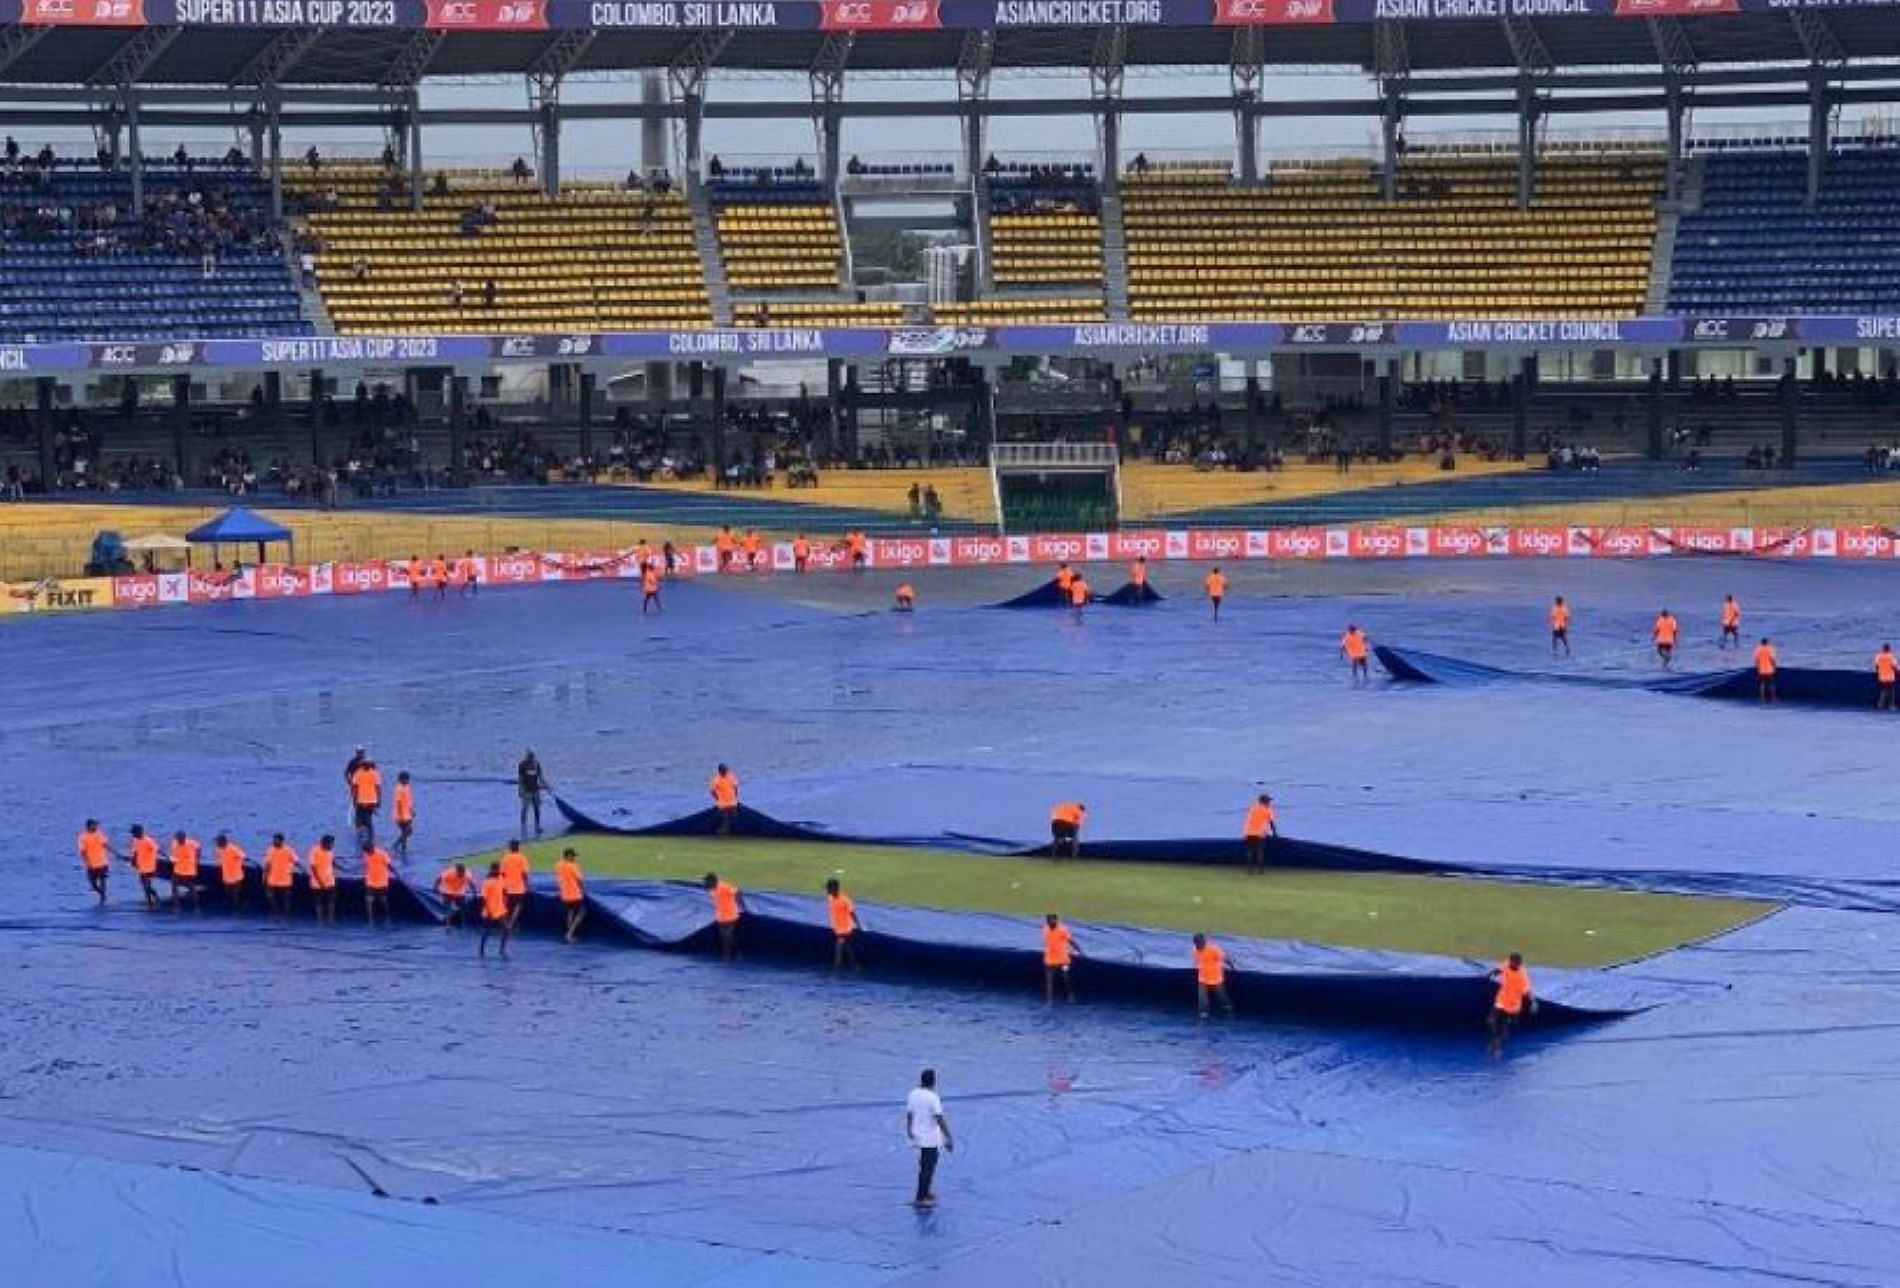 The groundstaff has been kept busy throughout the Asia Cup.